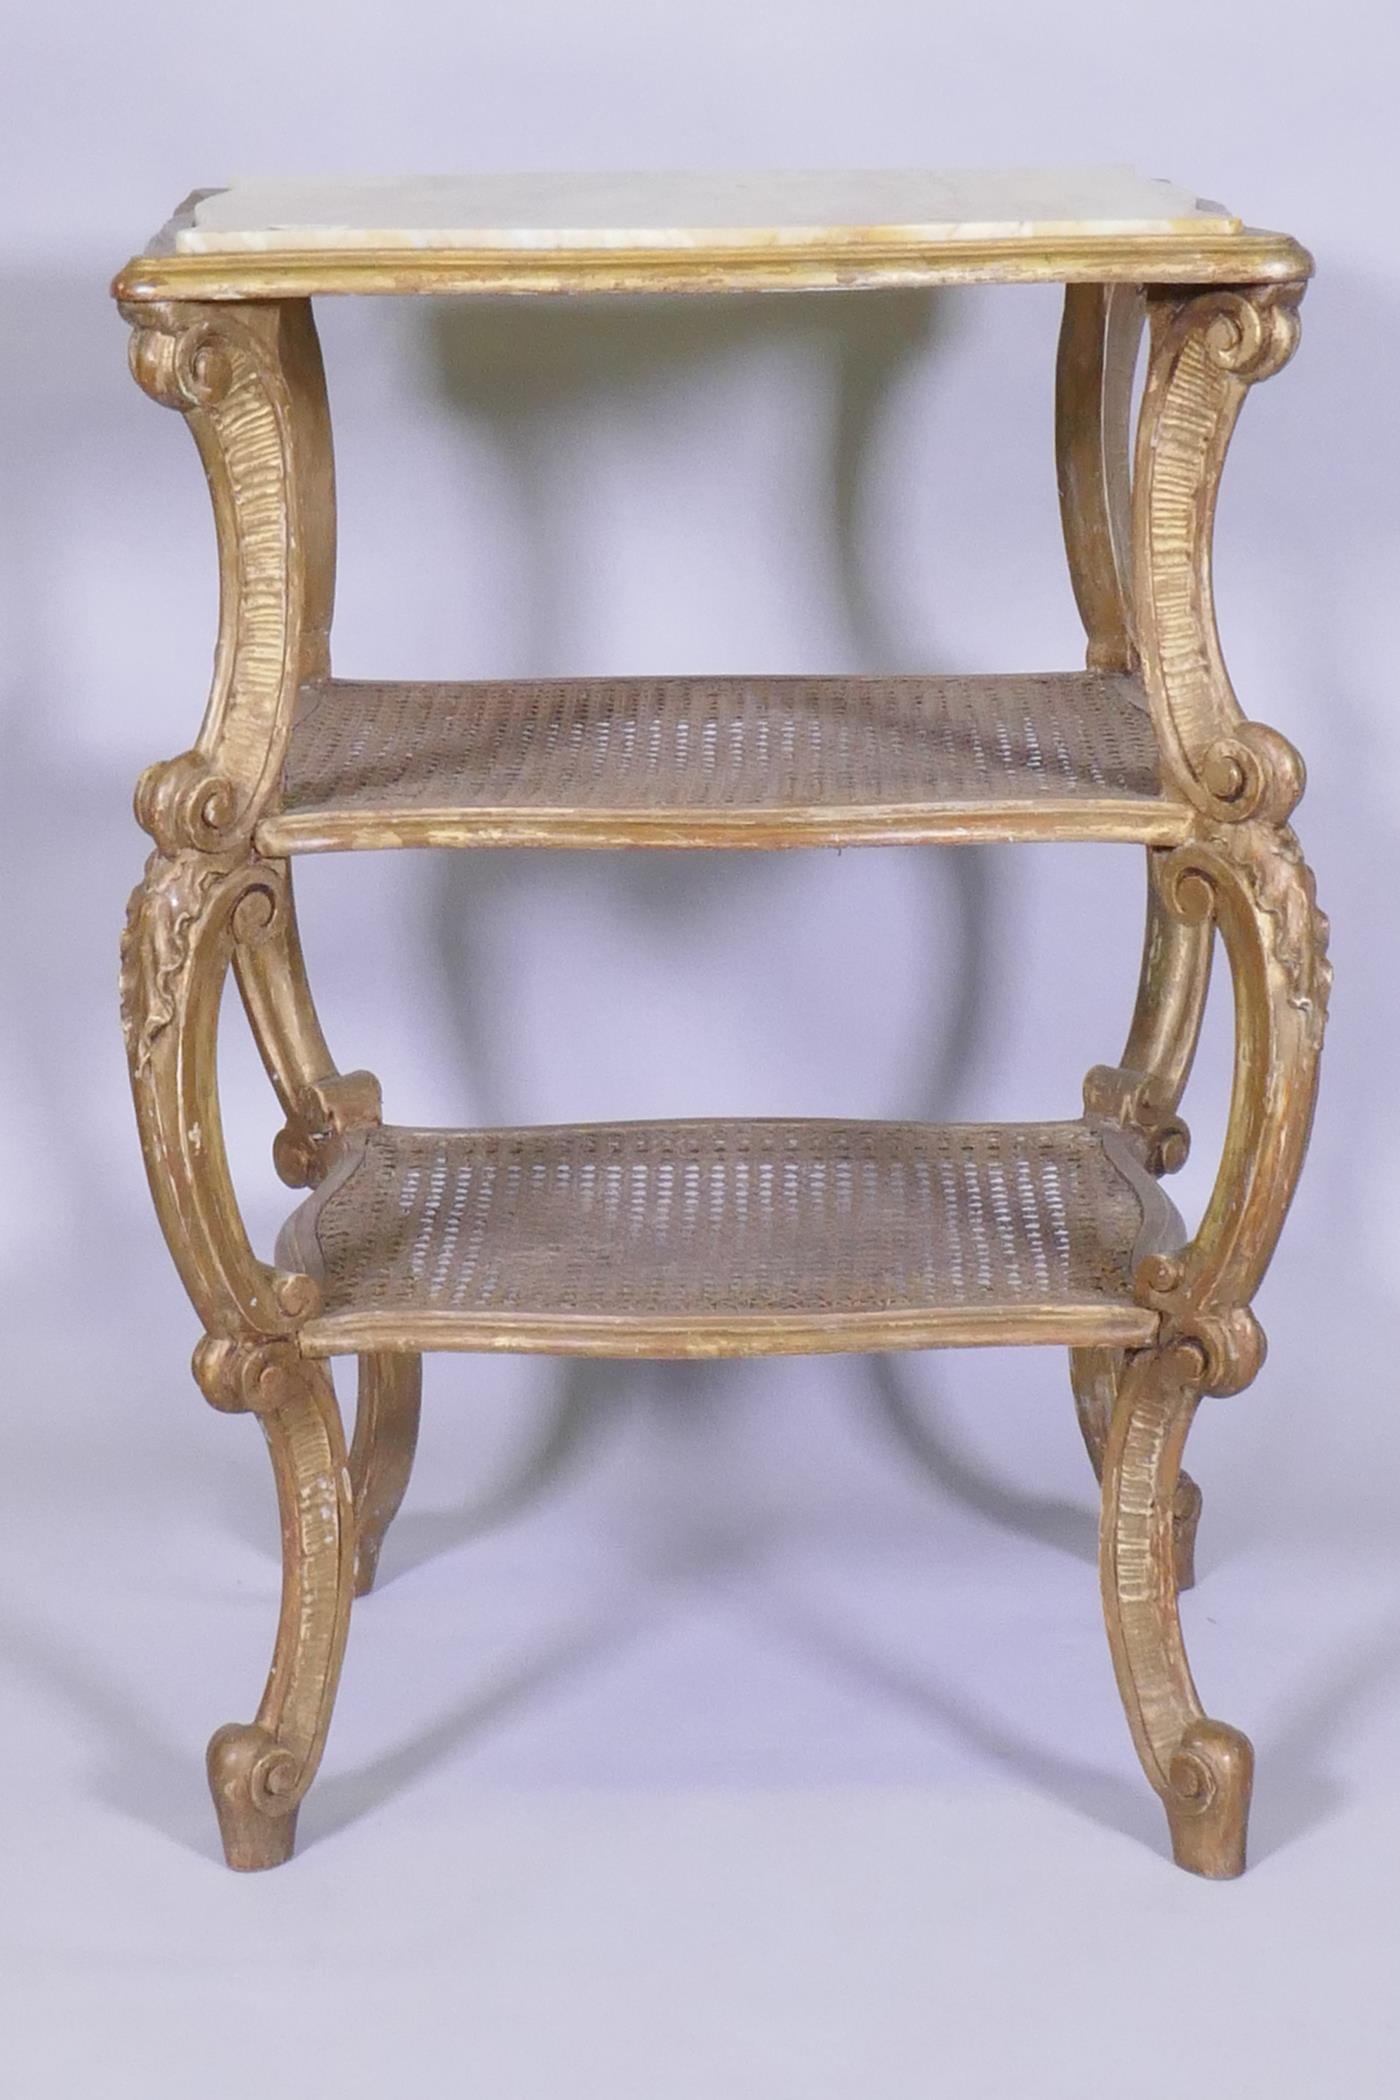 A C19th Italian giltwood three tier serpentine shaped etagere, with inset marble top and caned - Image 3 of 3